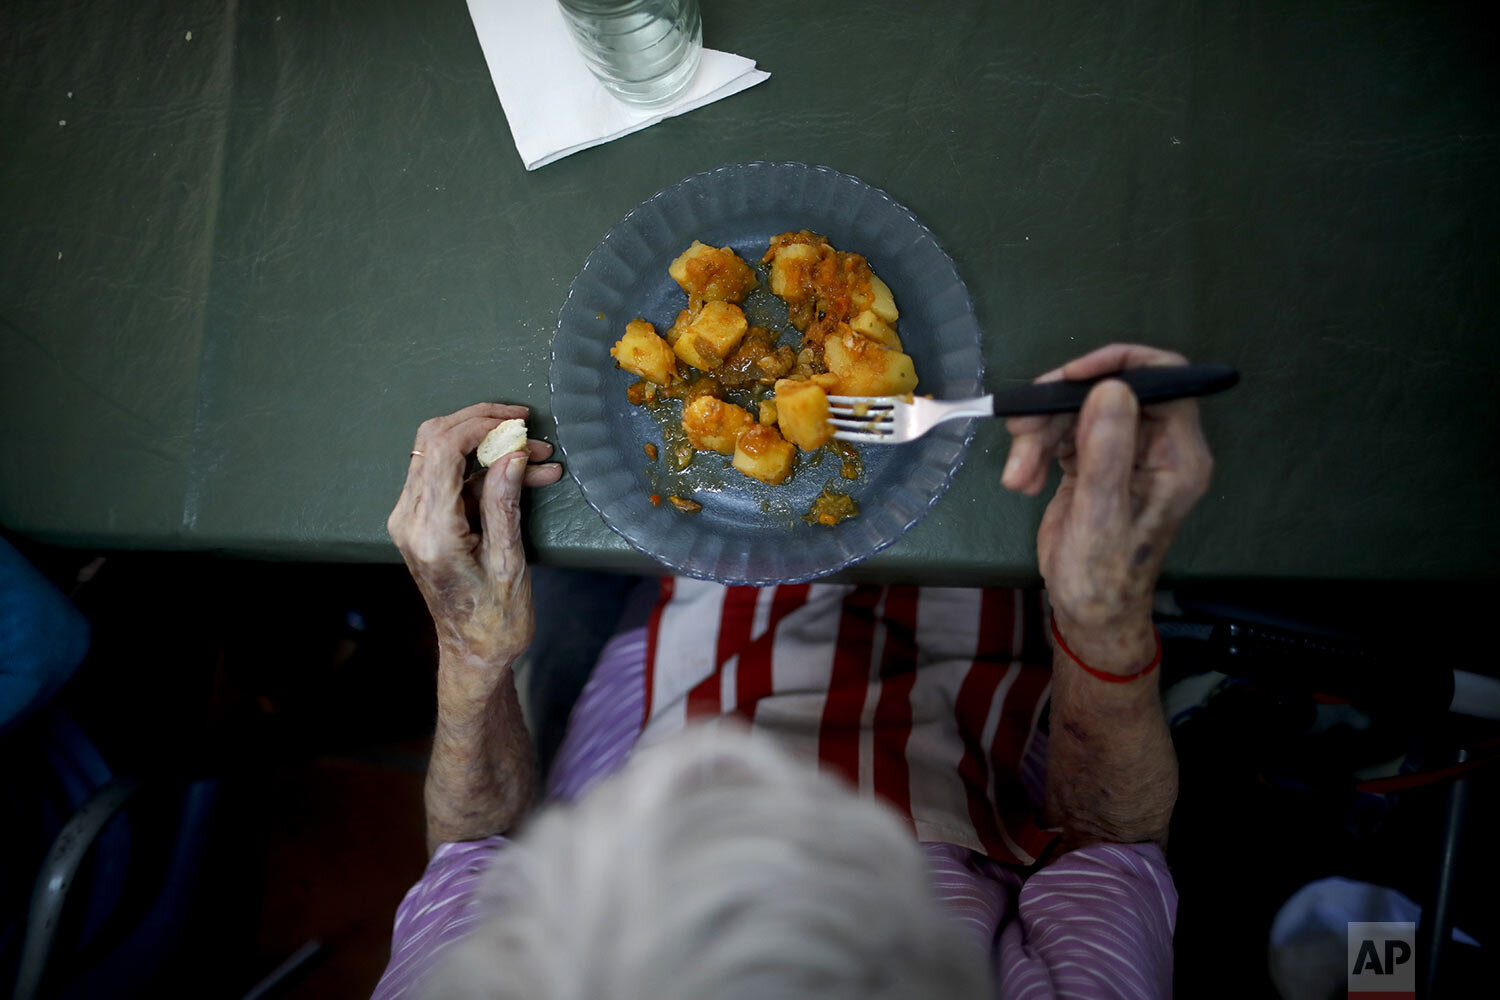  A woman eats lunch at the Reminiscencias residence for the elderly in Tandil, Argentina, Monday, April 5, 2021. (AP Photo/Natacha Pisarenko) 